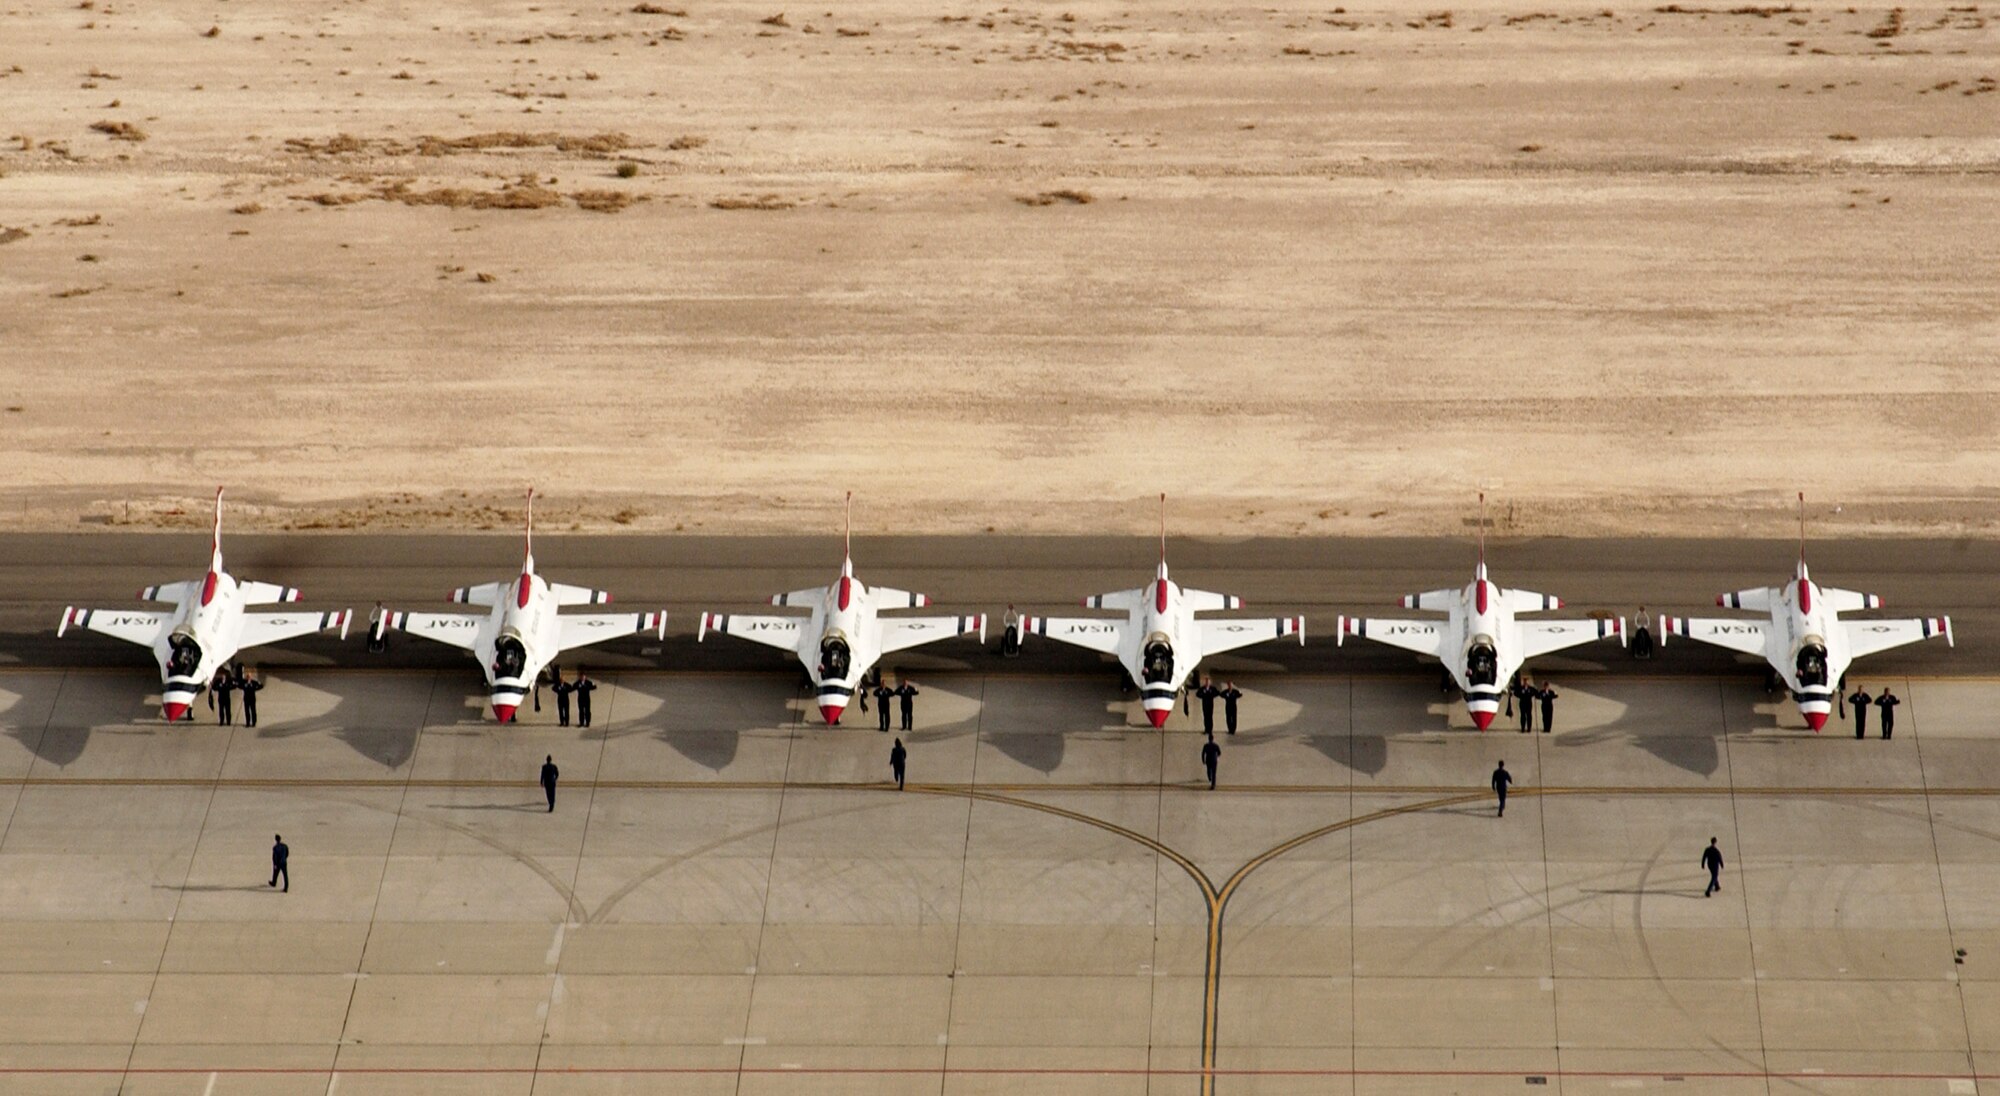 The U.S. Air Force Air Demonstration Squadron, the Thunderbirds, begin their ground show at the start of their demonstration during Aviation Nation 2006 Nov. 12 at Nellis Air Force Base, Nev. Aviation Nation has been called one of the most diverse, entertaining and well run air shows in America. (U.S. Air Force photo/Master Sgt. Kevin J. Gruenwald)
